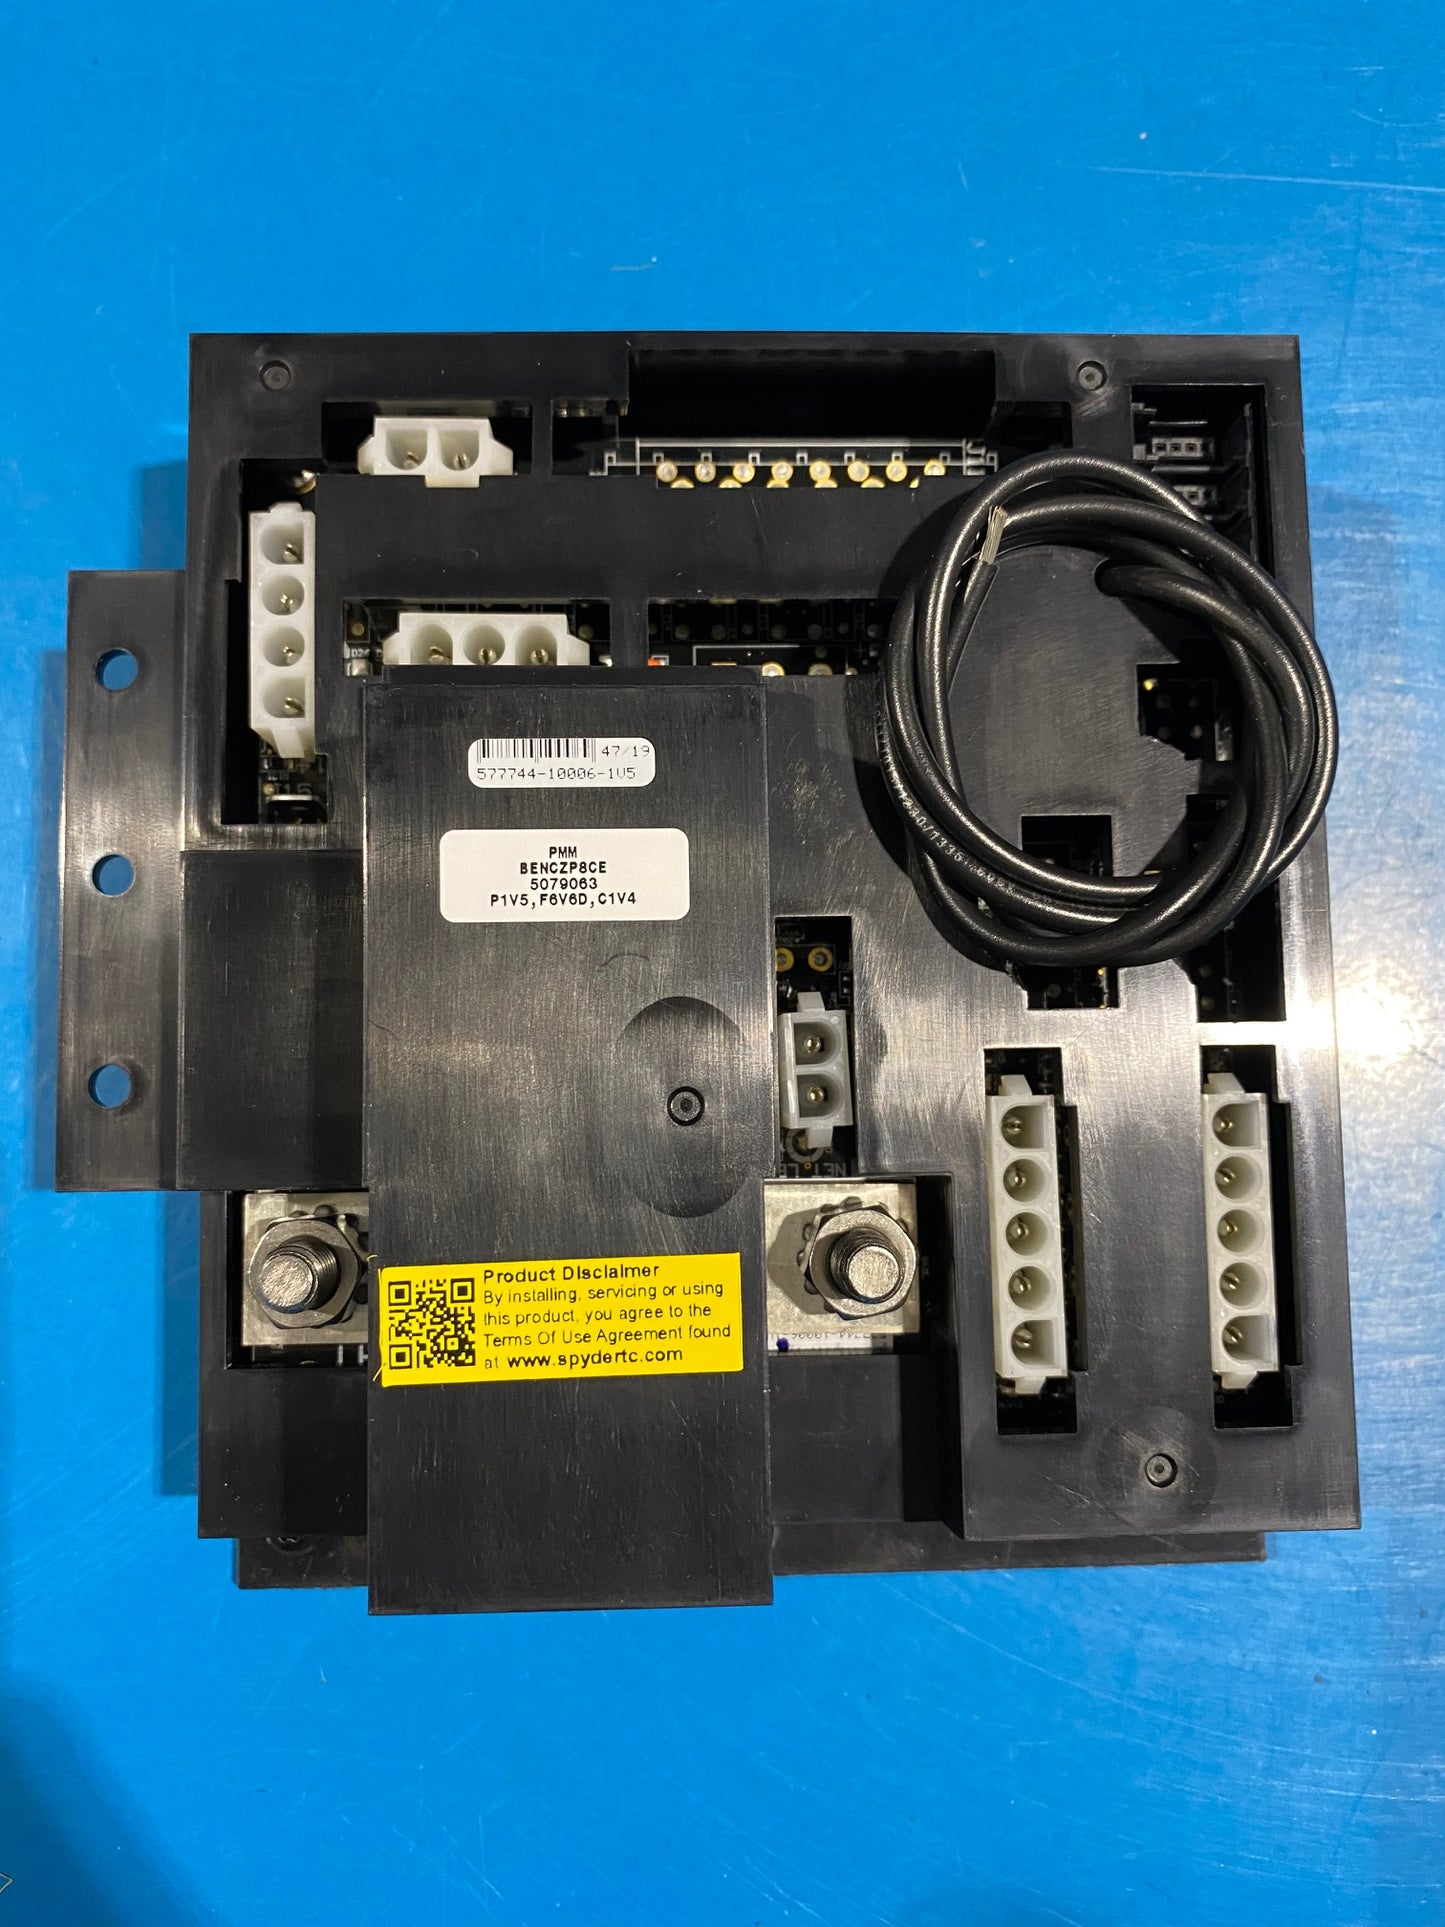 5079063 BENCZP8CE - Enclosure Assy, PMM, 2019 Red, Z